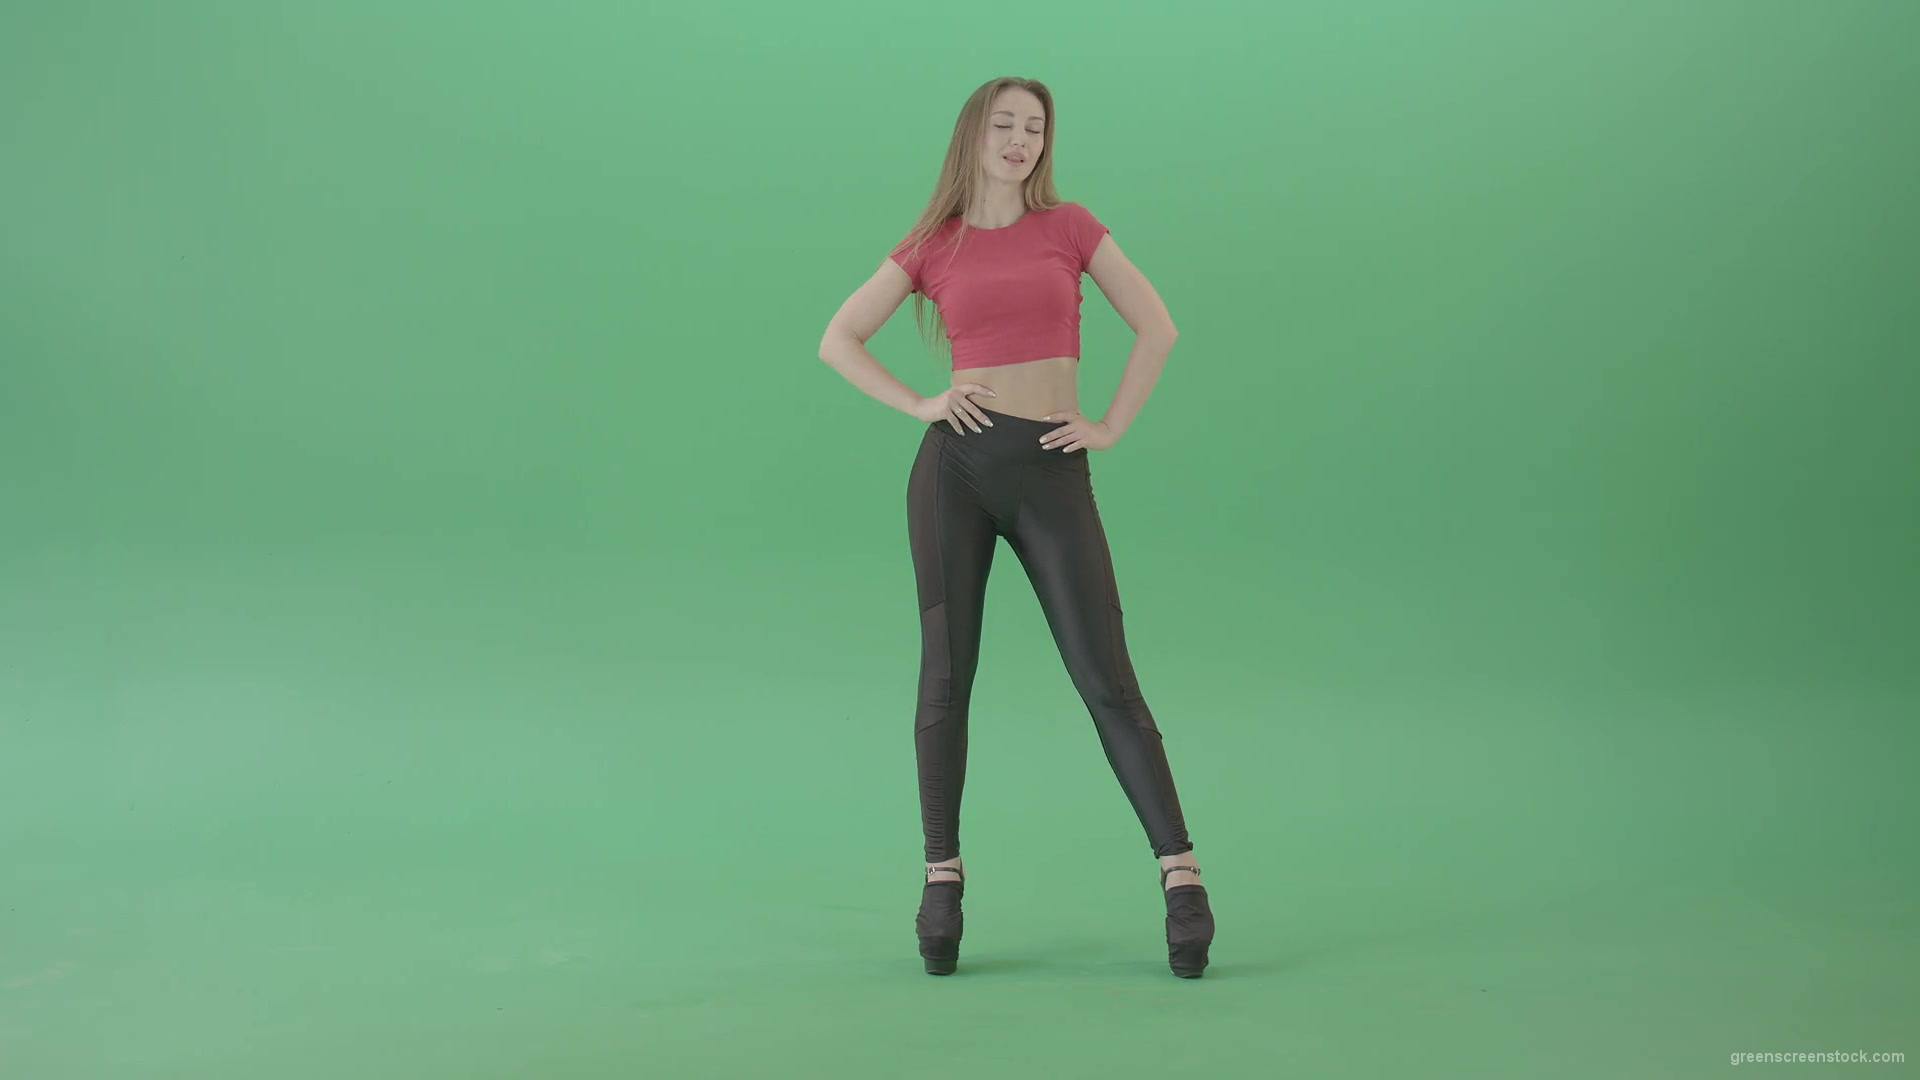 Advertising-Girl-posing-in-front-view-full-size-on-green-screen-4K-Video-Footage-1920_002 Green Screen Stock